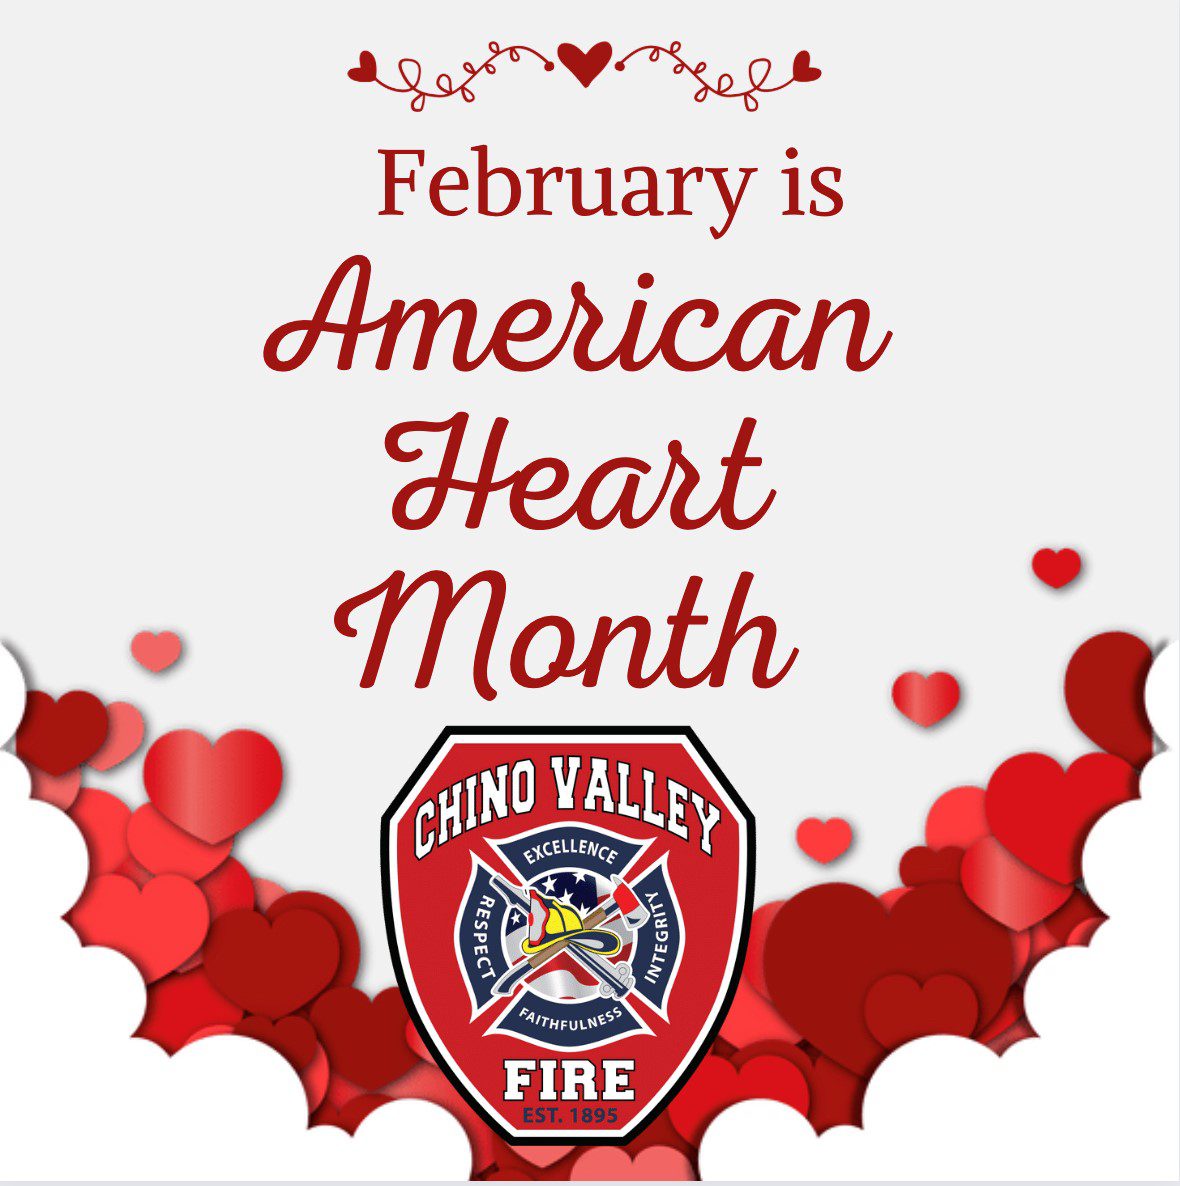 Image of Chino Valley Fire Logo over cluster of red hearts. Text on image reads February is American Heart Month.